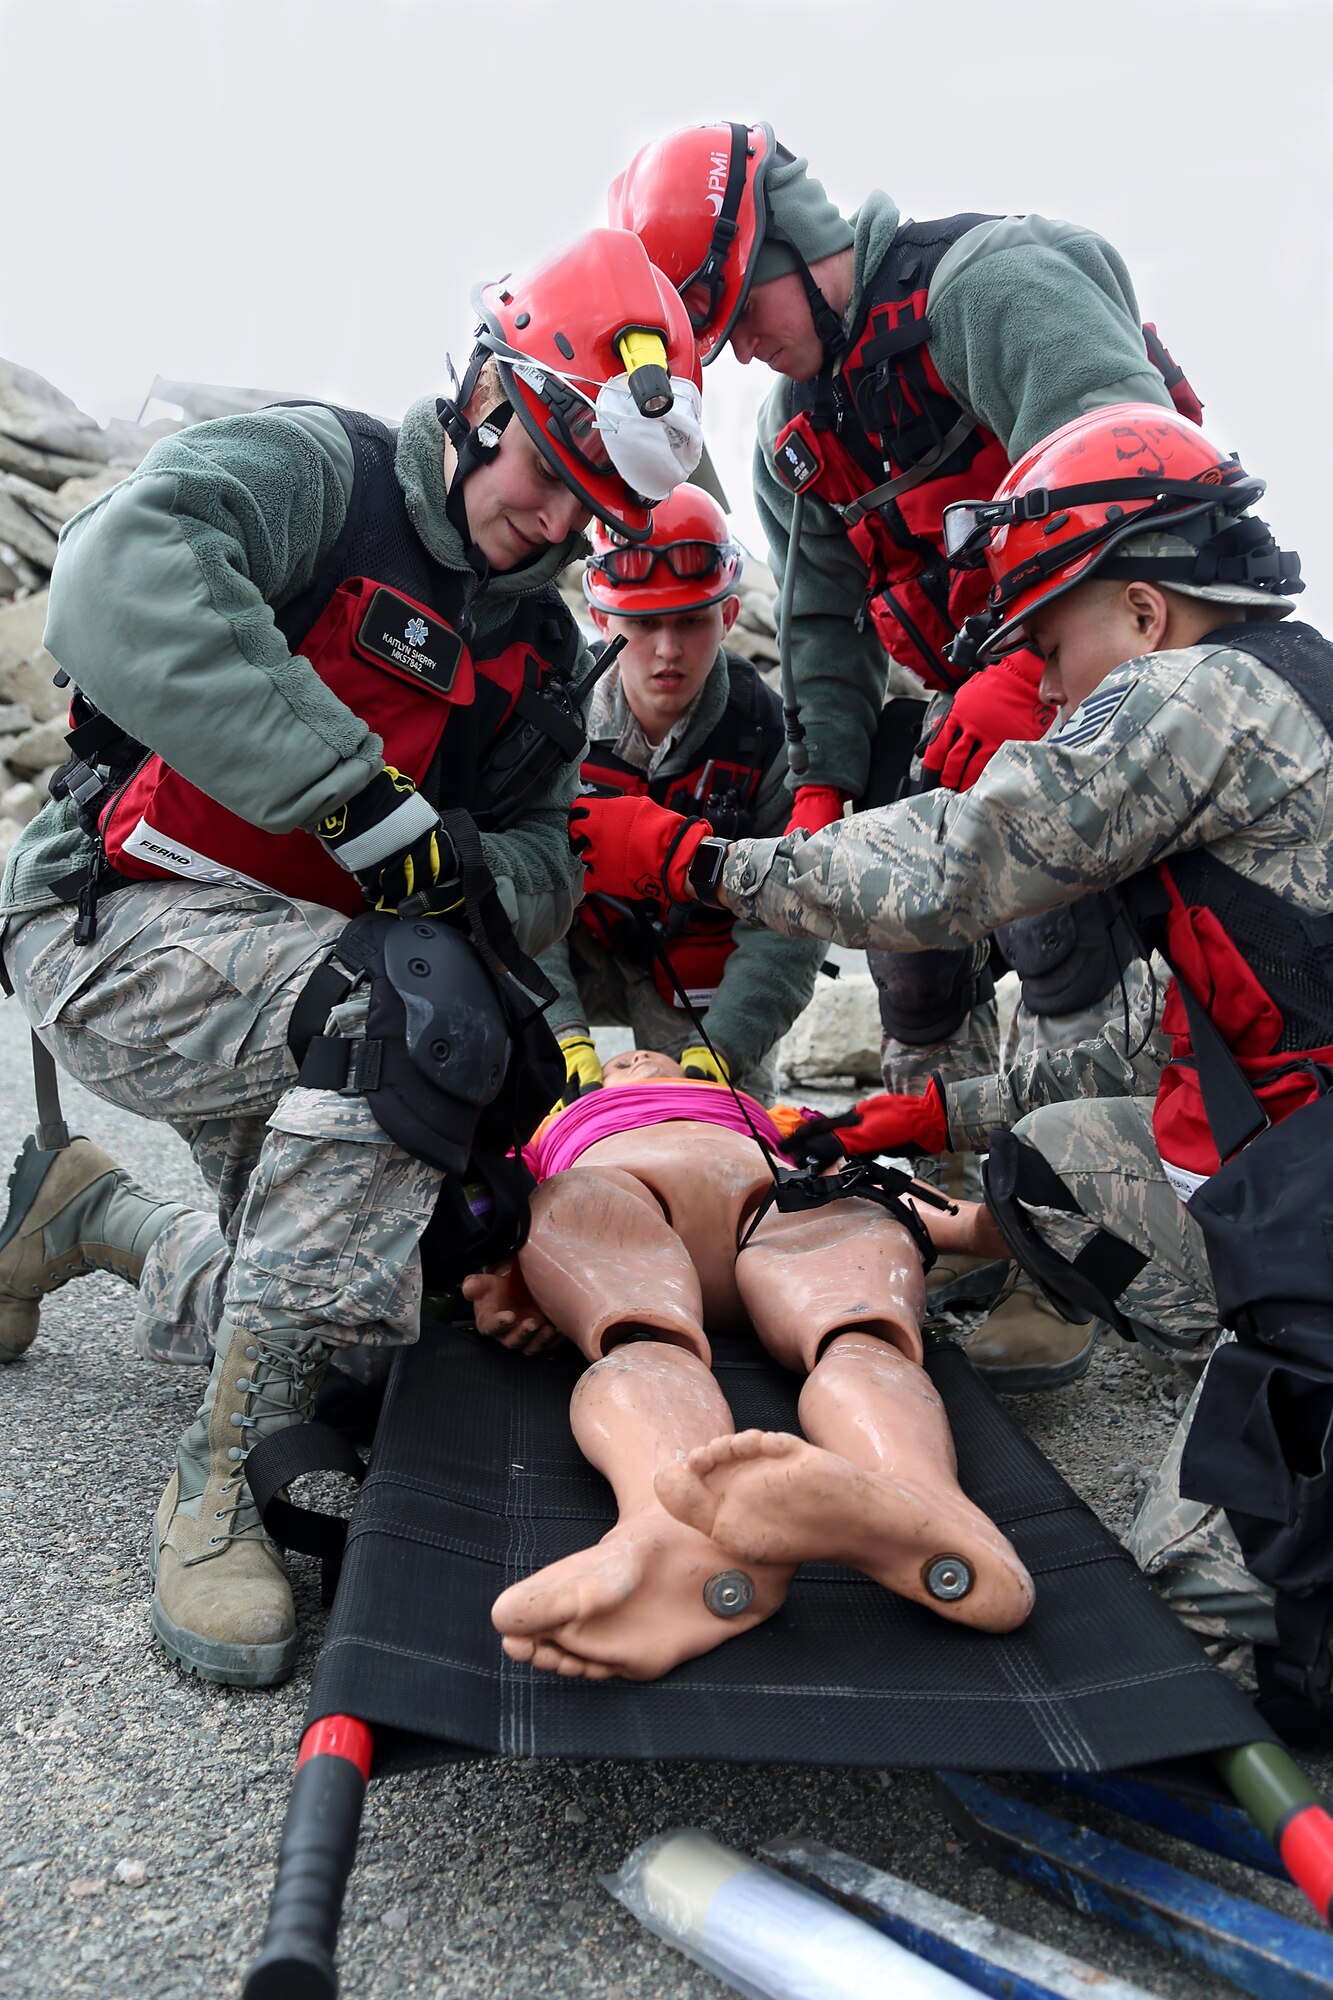 Search and Extraction medics, assigned to the 157th Medical Group, N.H. Air National Guard,  provide life-saving care to a simulated casualty on April 11, 2018 at Joint Base Cape Cod, Mass. The medics participated in a week-long deployment readiness exercise as part of the New England CBRNE Enhanced Response Force Package (CERFP). (N.H. Air National Guard photo by Staff Sgt. Kayla White)